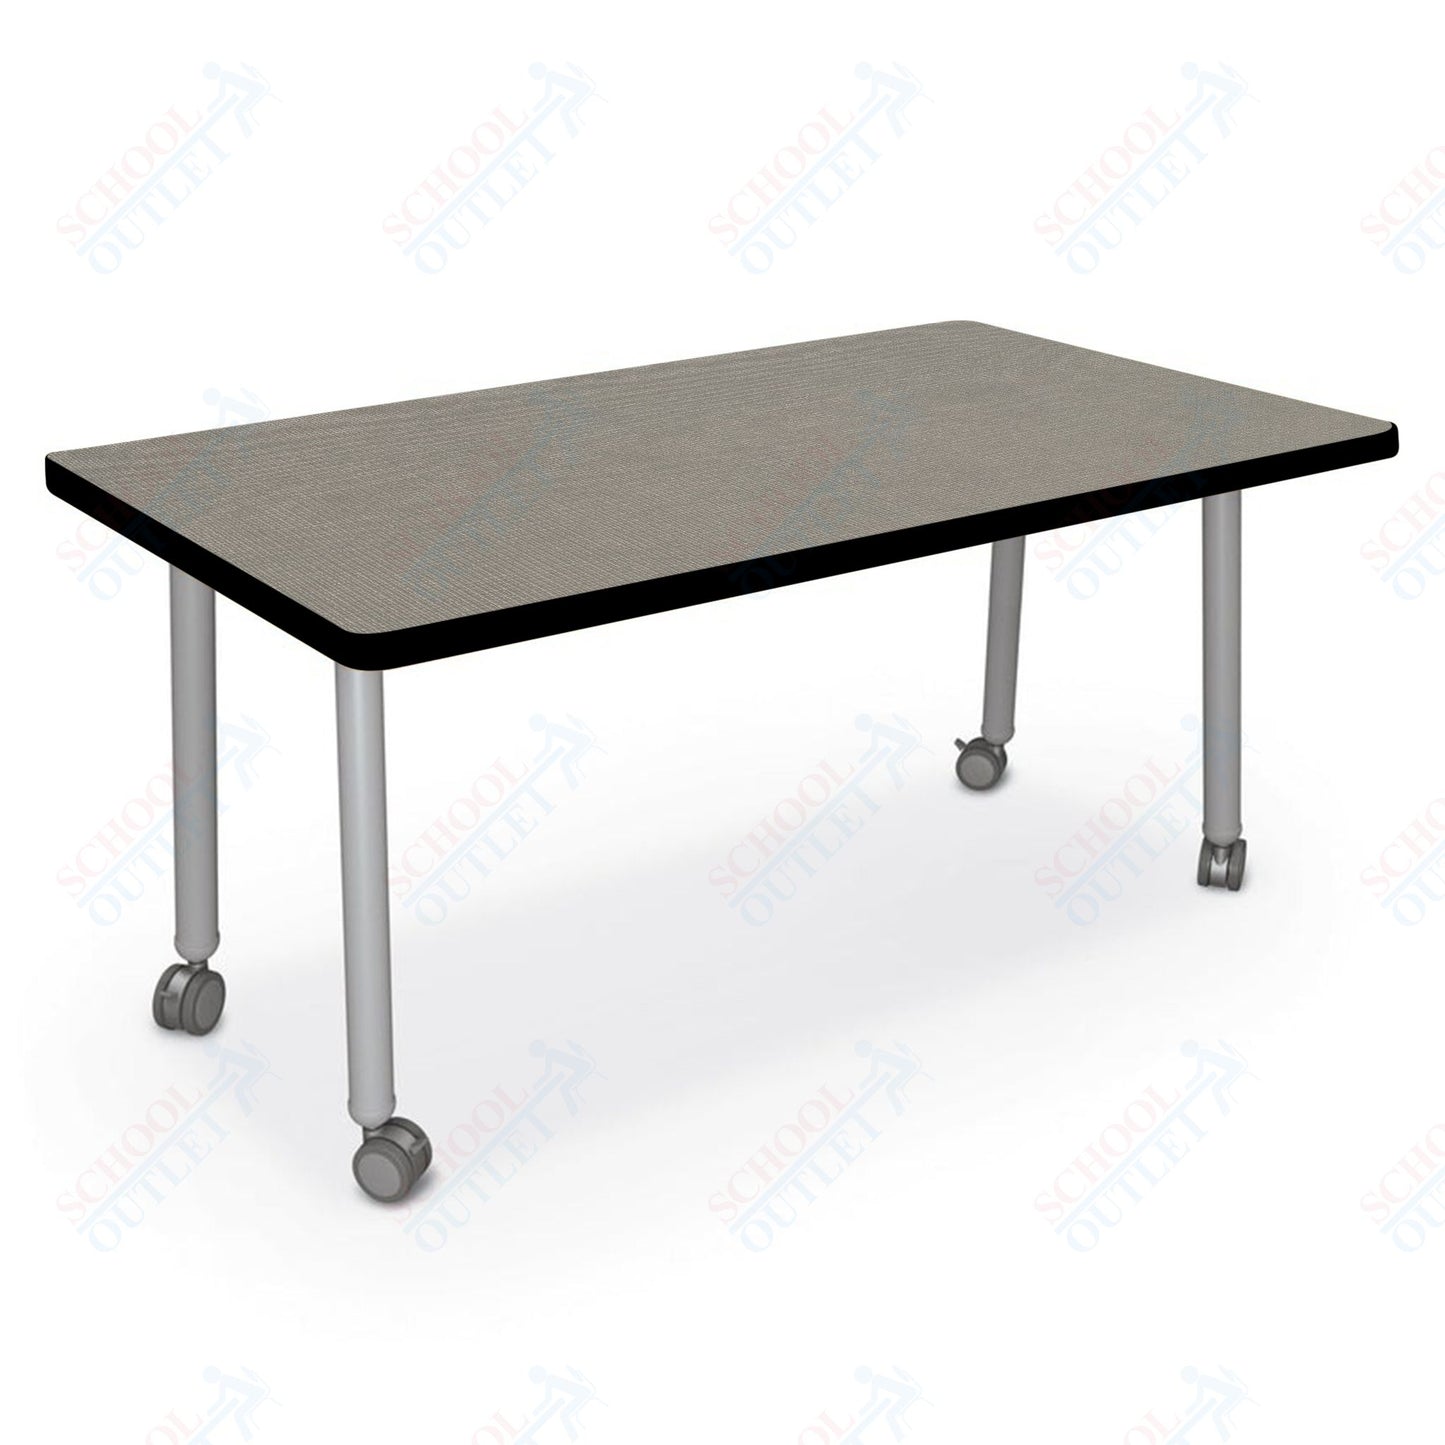 Mooreco Akt Table – 36"D x 72"W Rectangle, Laminate or Butcher Block Top, Fixed Height Available in 29"H, 36"H, or 42"H